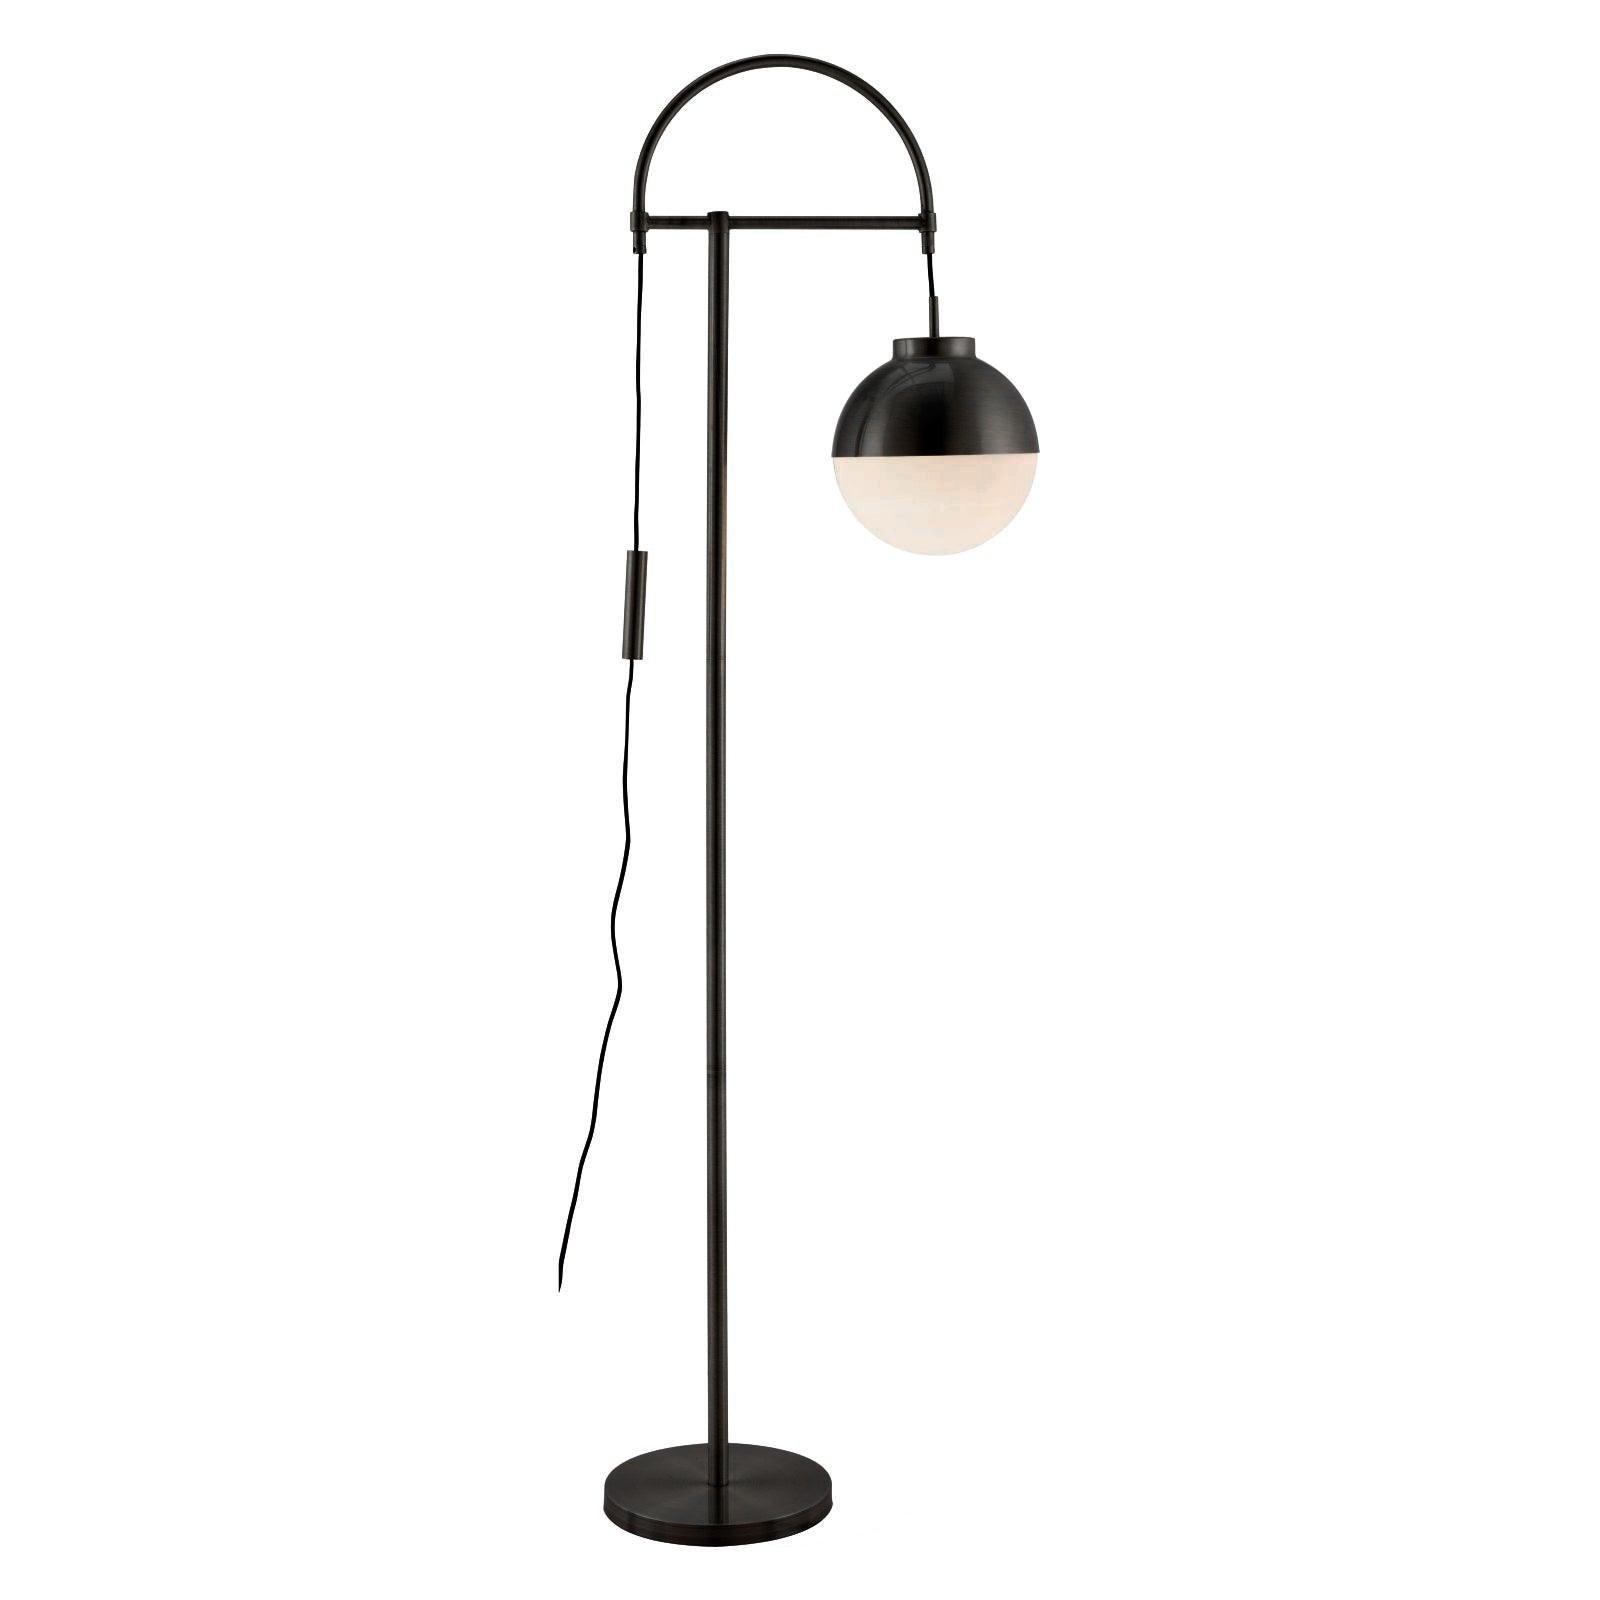 Waterloo Floor Lamp in Black with UK Plug, Diameter 15.7 inches x Height 65 inches (40cm x 165cm)